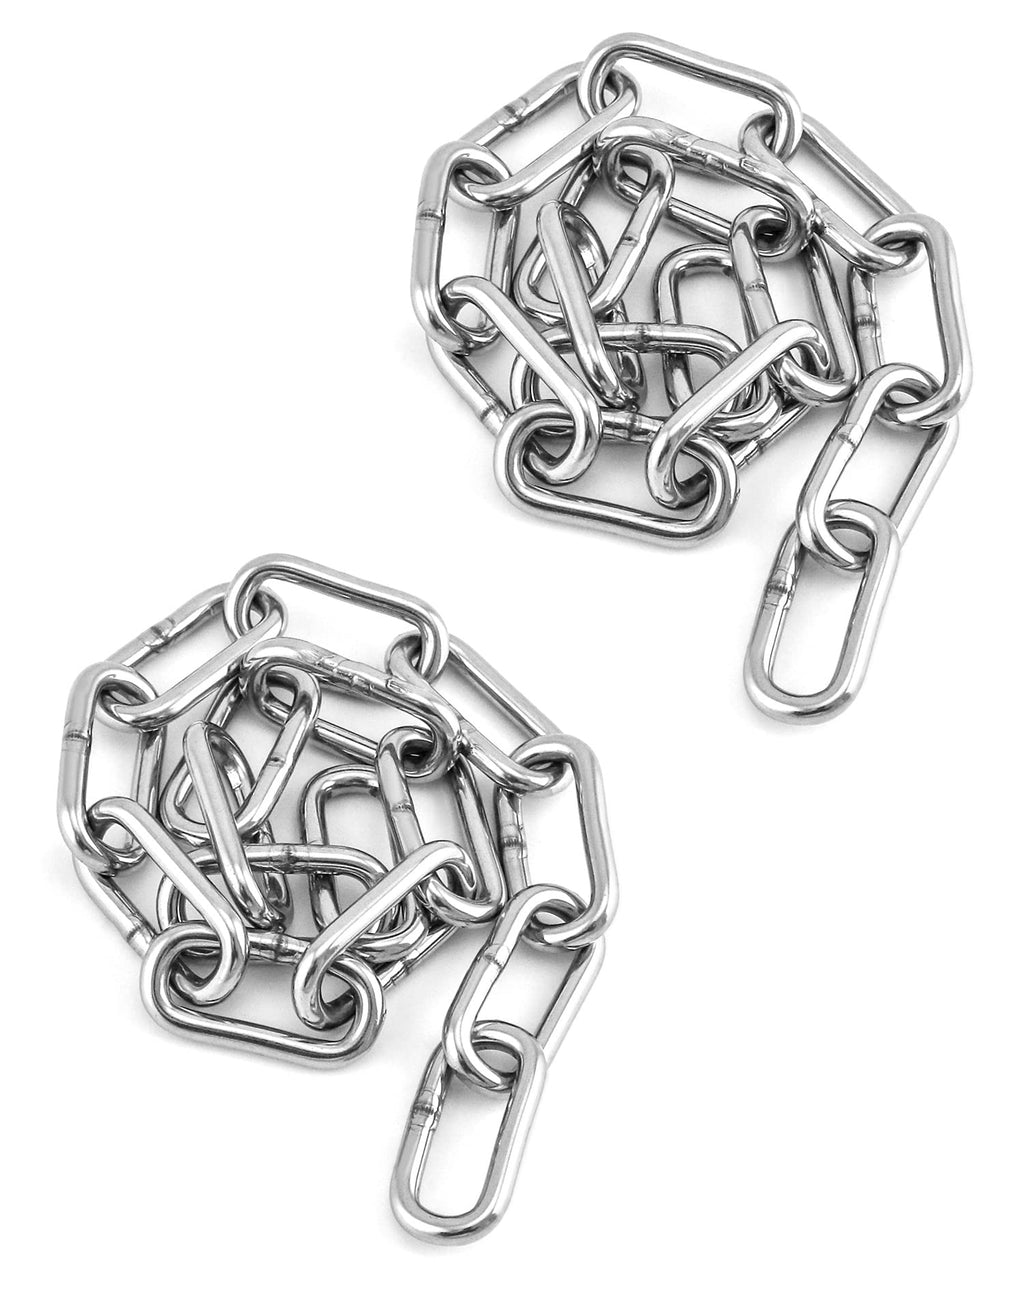  [AUSTRALIA] - QWORK Stainless Steel Safety Chain, 2 Pcs 20" (L) x 0.20" (T) Long Ring Link Coil Chain for Suspension Traction